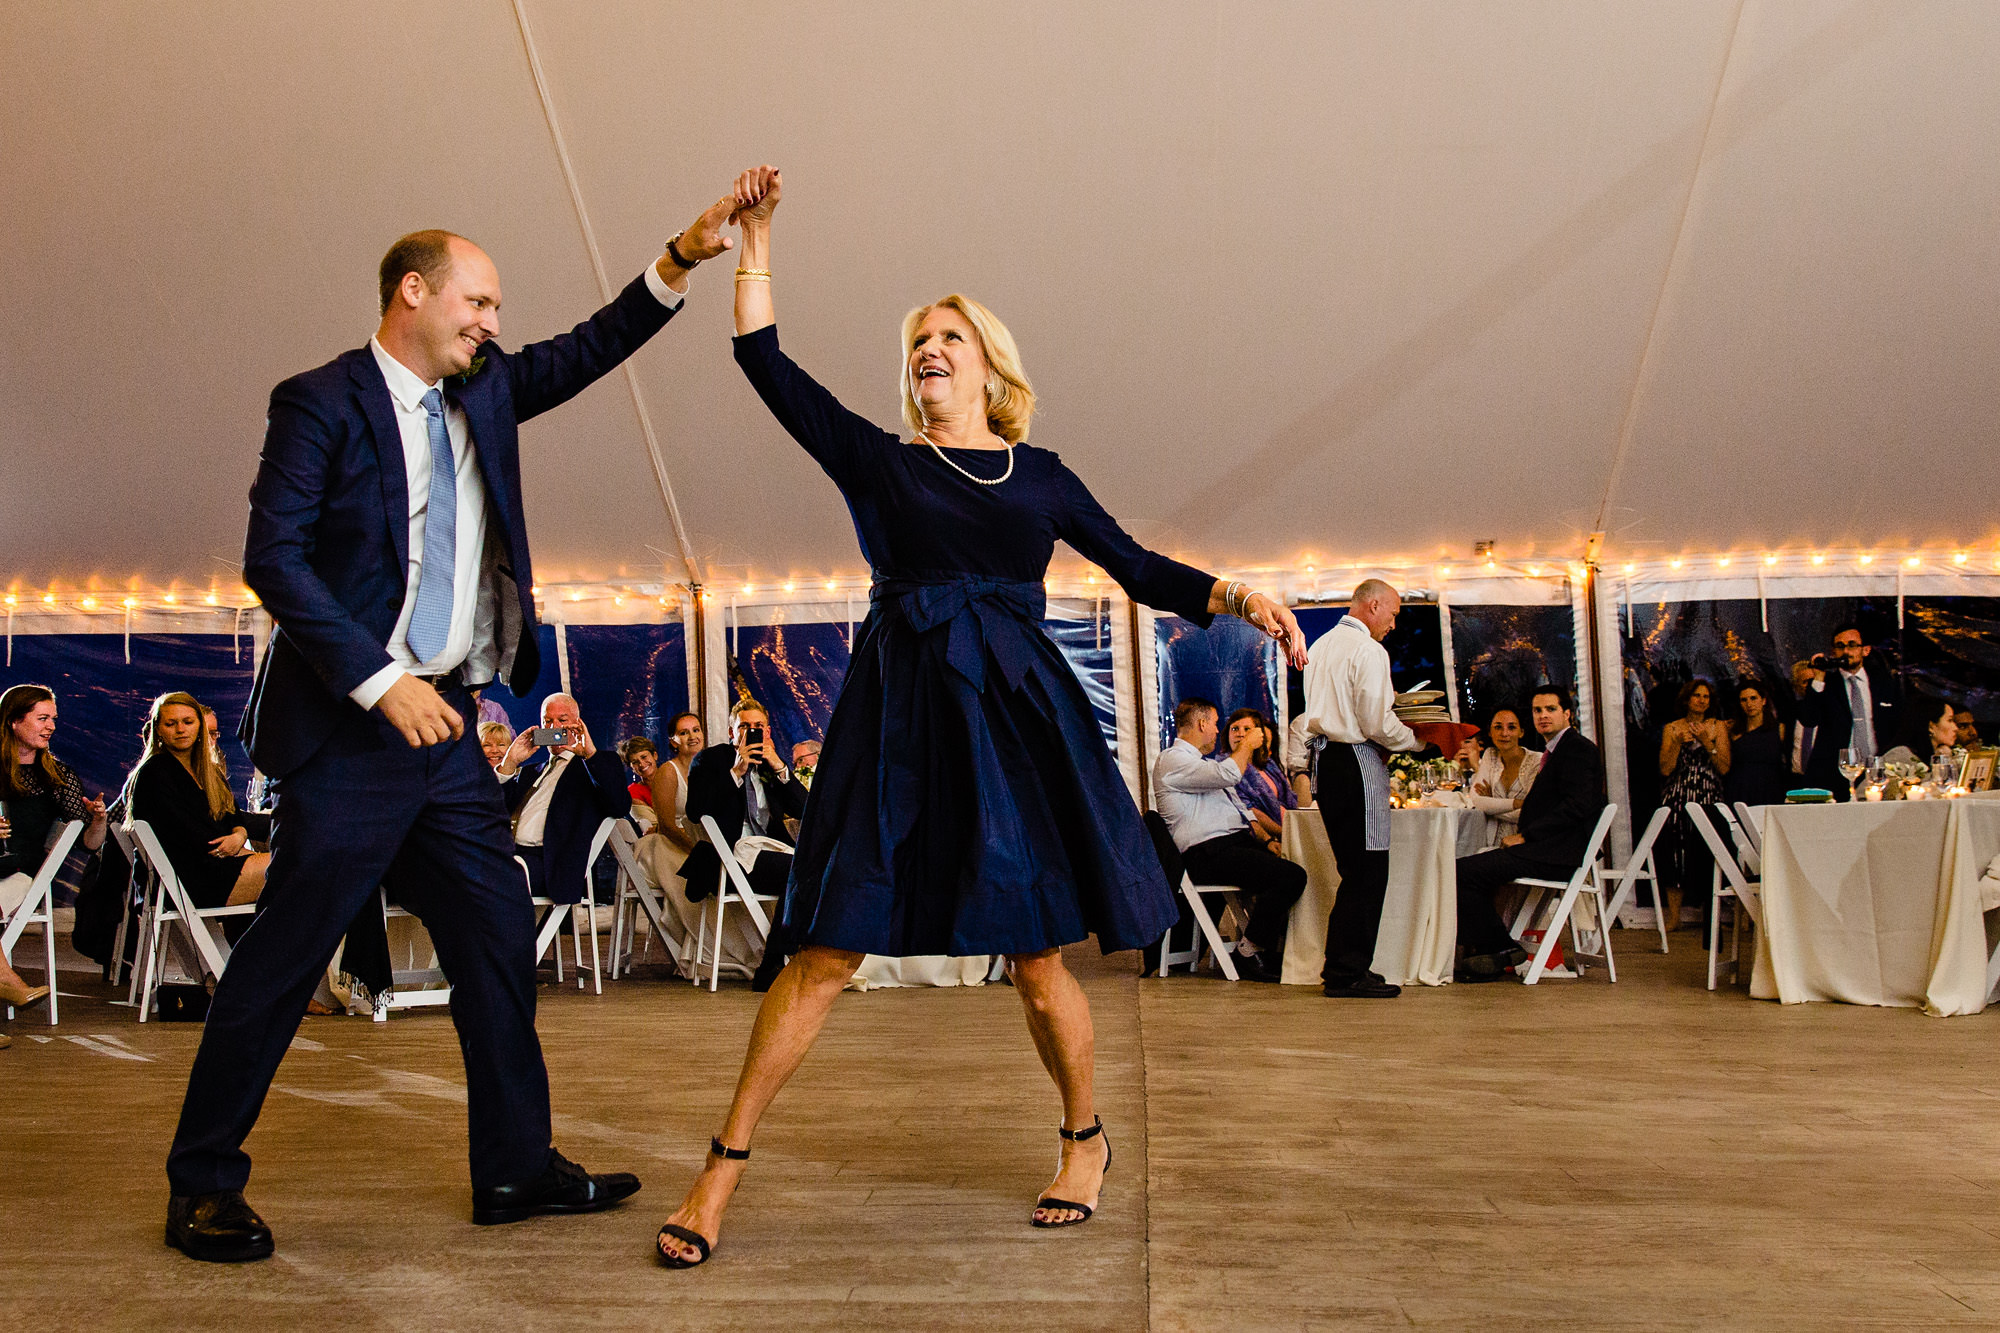 The groom dances with his mother at a Stockton Springs, Maine wedding.